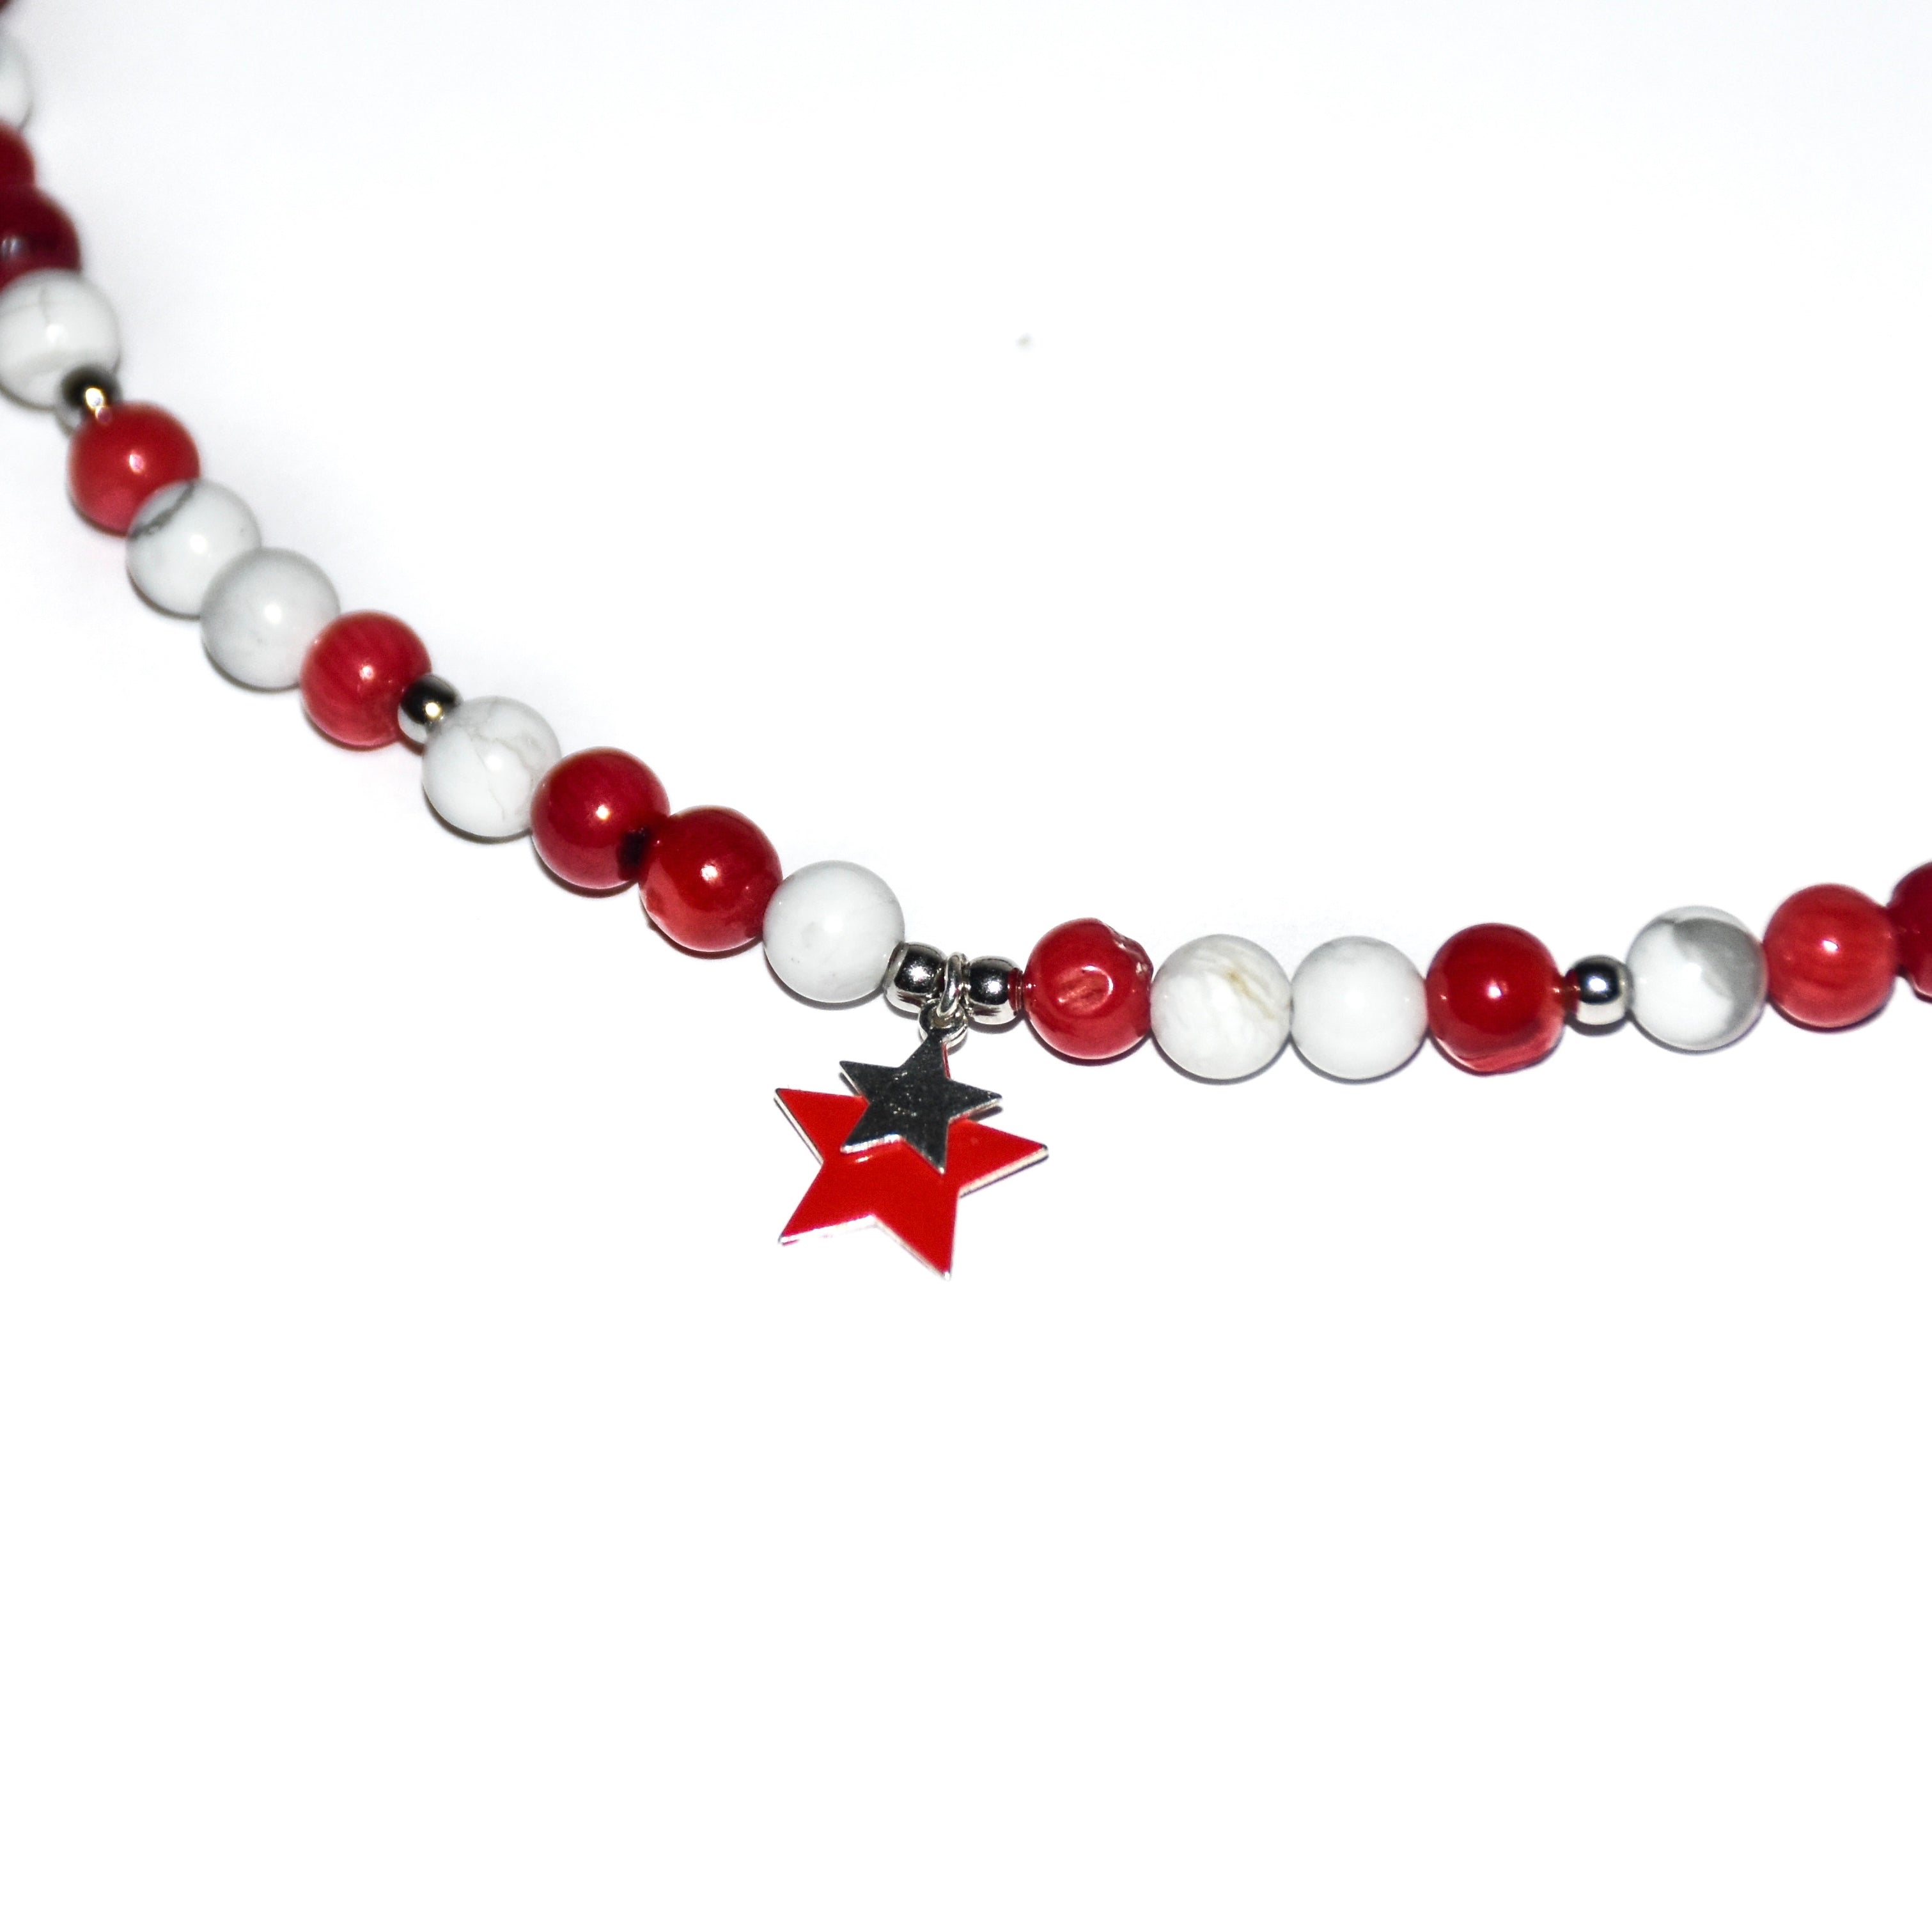 MELTED STAR NECKLACE